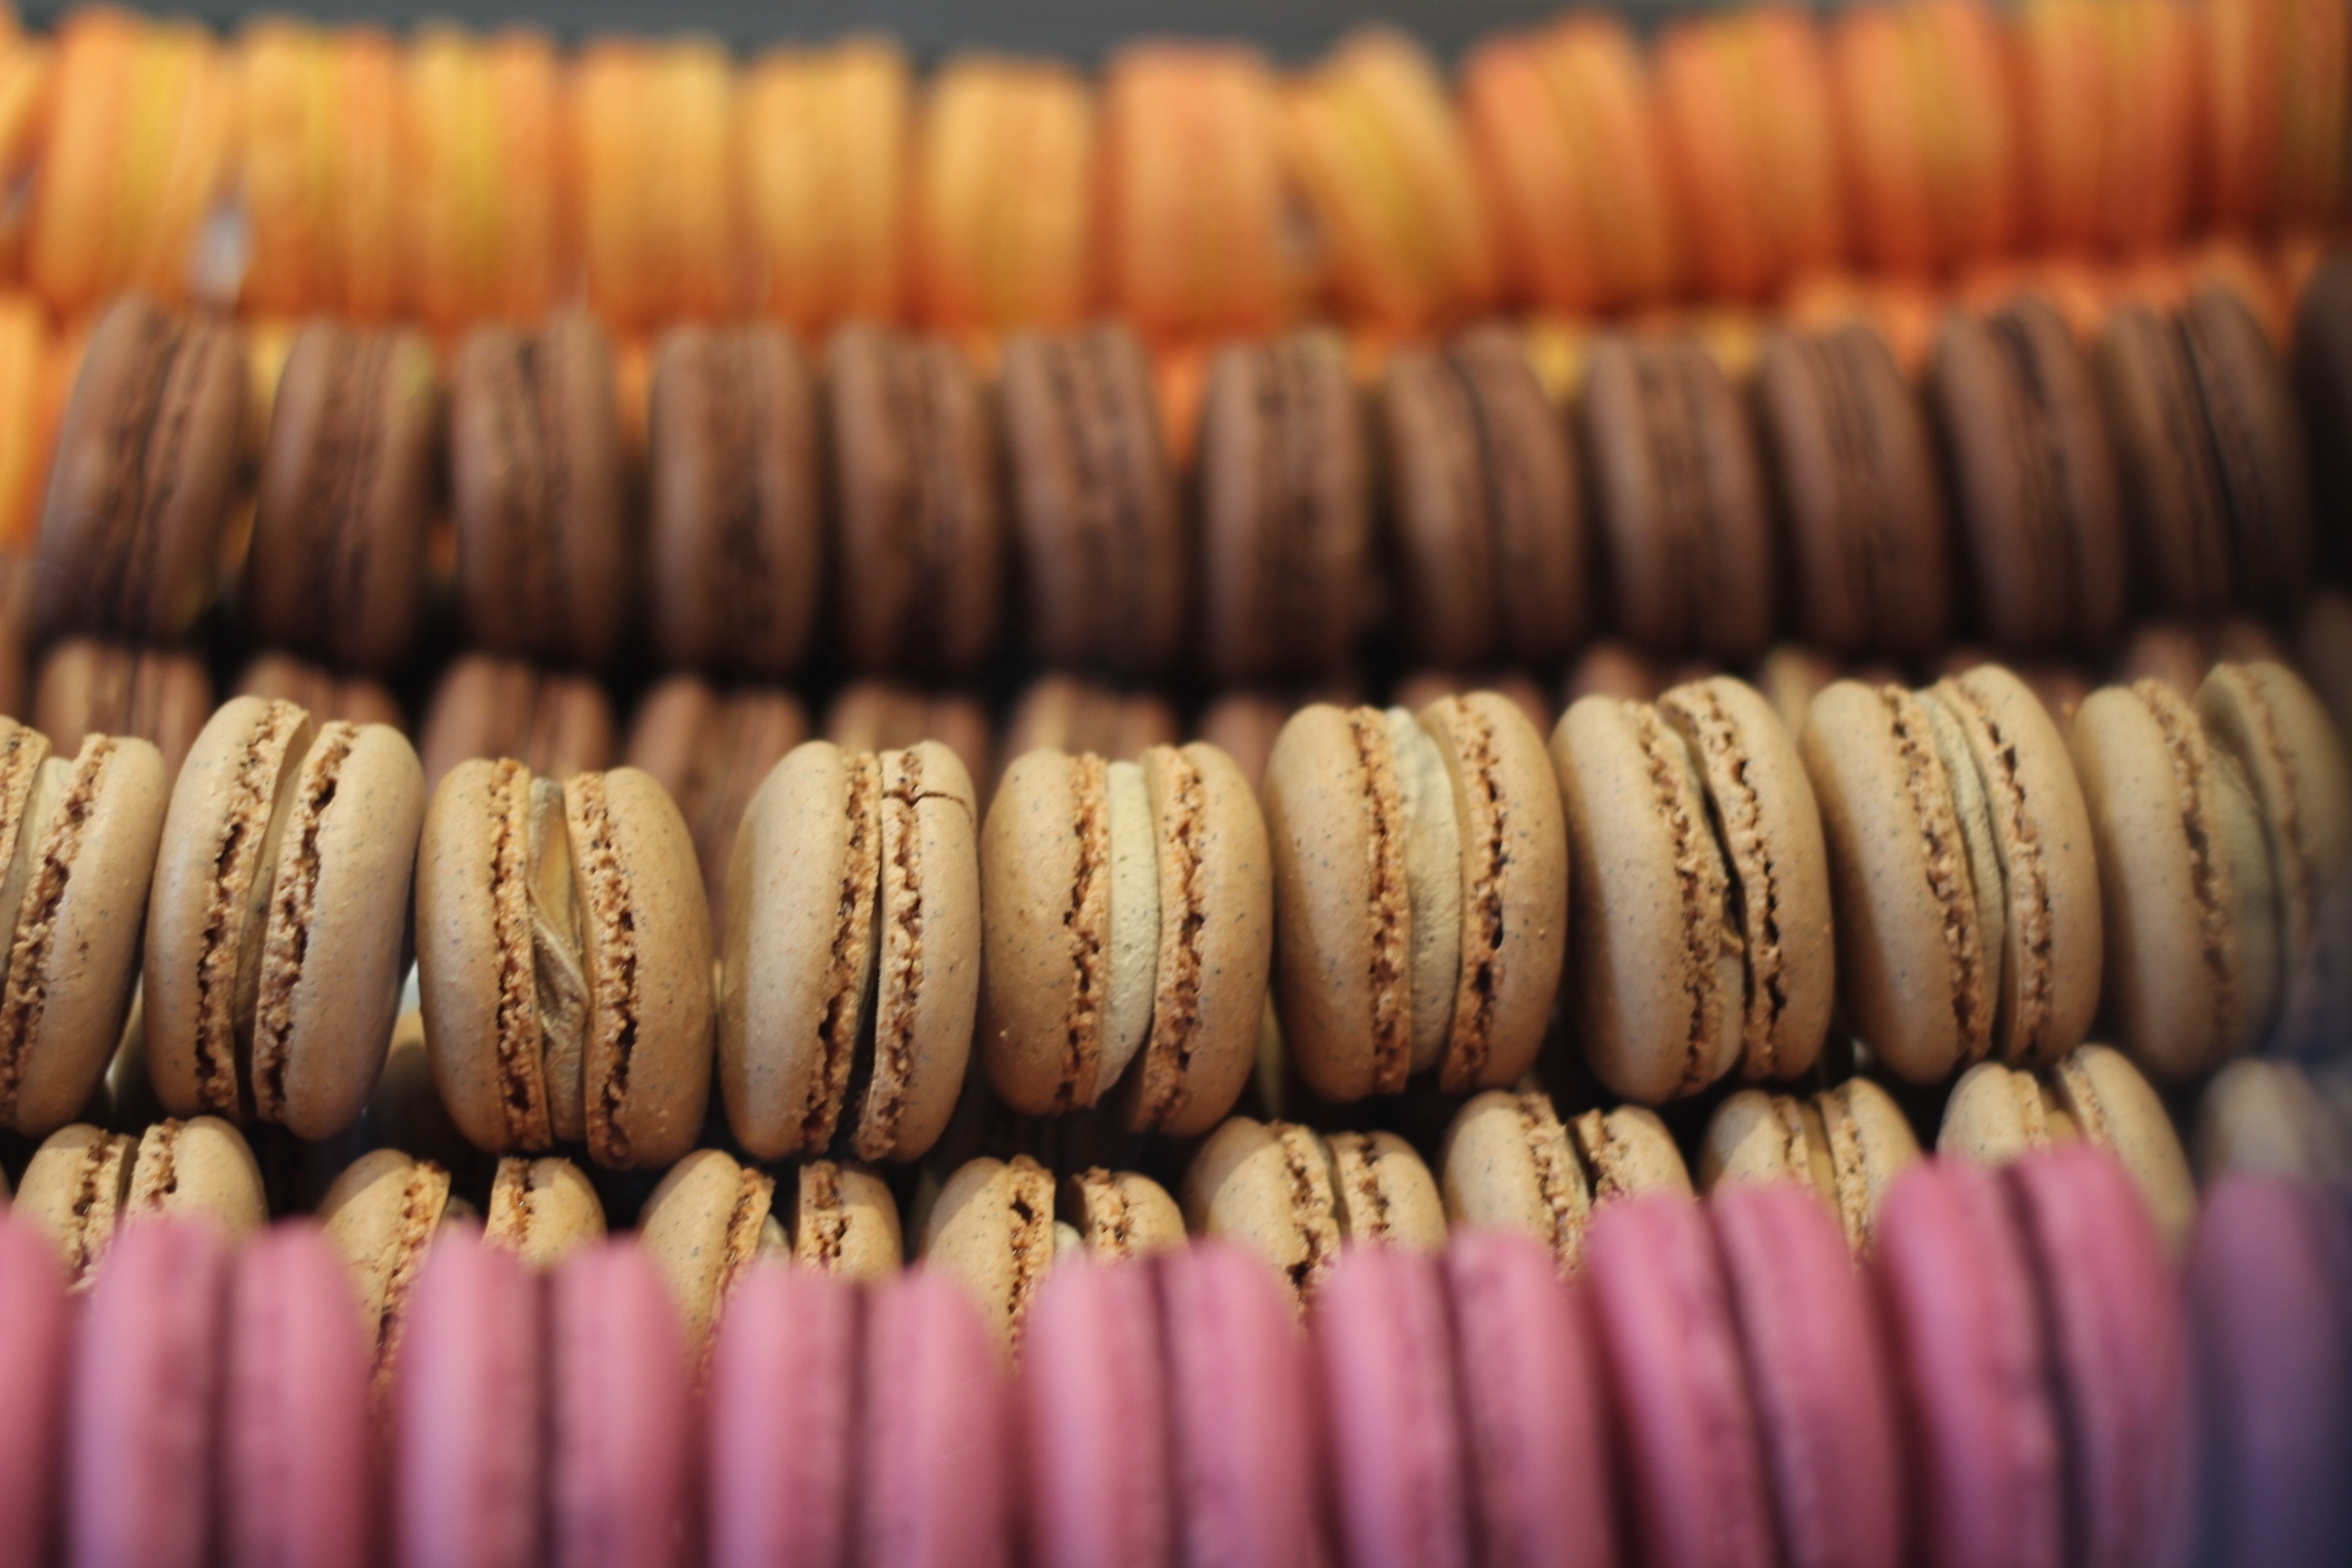 French, Macarons, Bakery, Dessert, food and drink, close-up